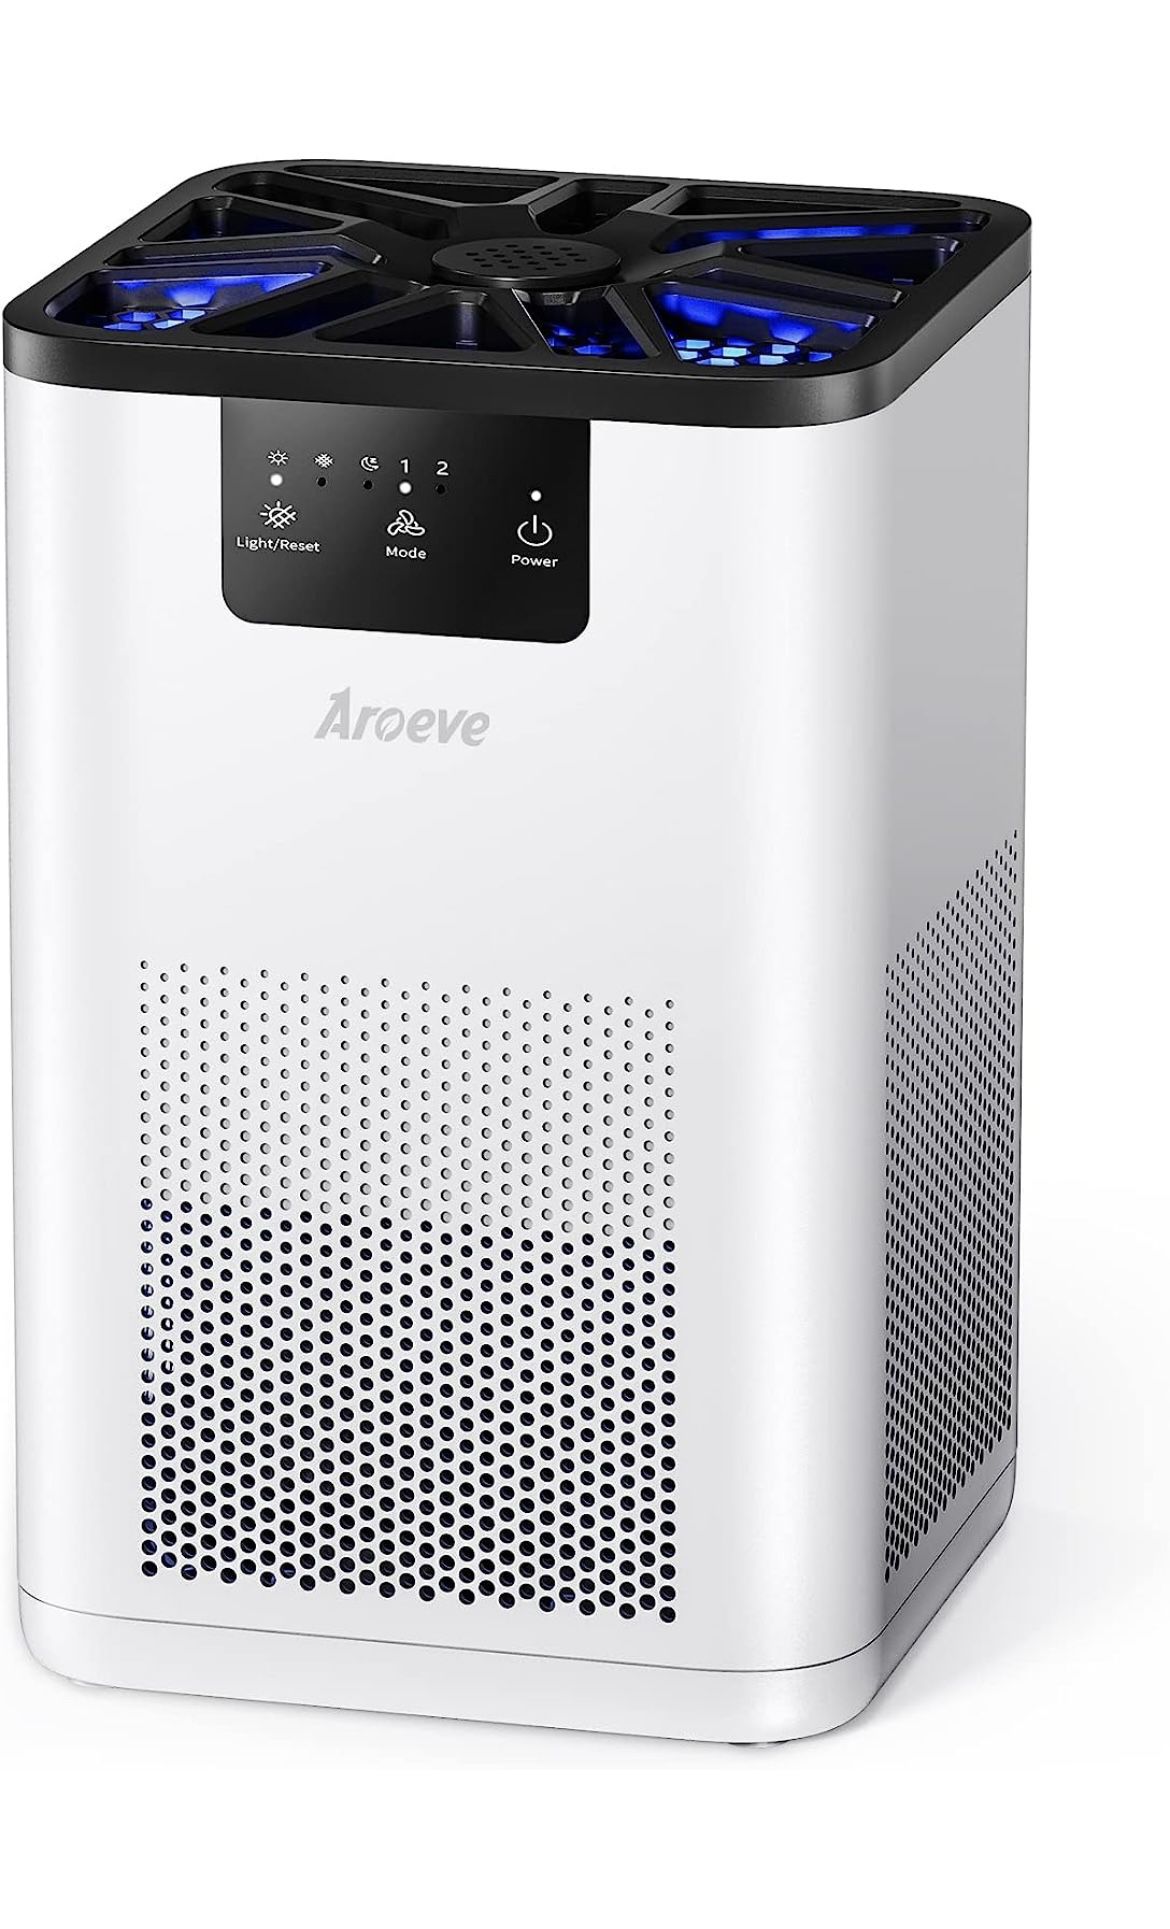   AROEVE Air Purifiers for Bedroom HEPA Air Purifier With Aromatherapy Function For Pet Smoke Pollen Dander Hair Smell 20dB Air CleaReg. Retail $59.99